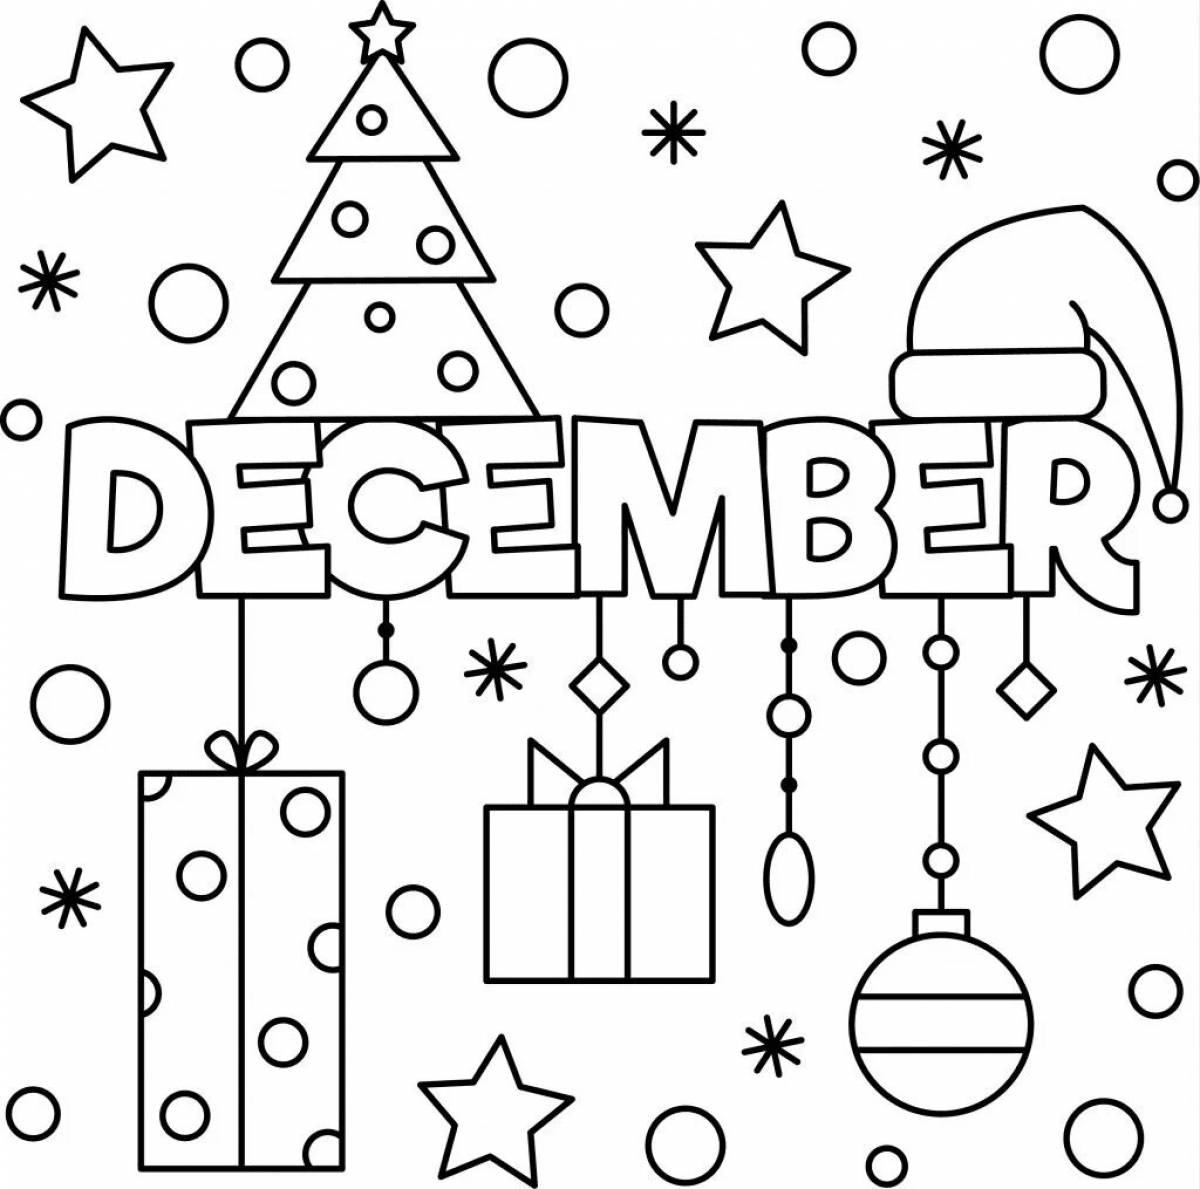 Blessed December coloring pages for kids